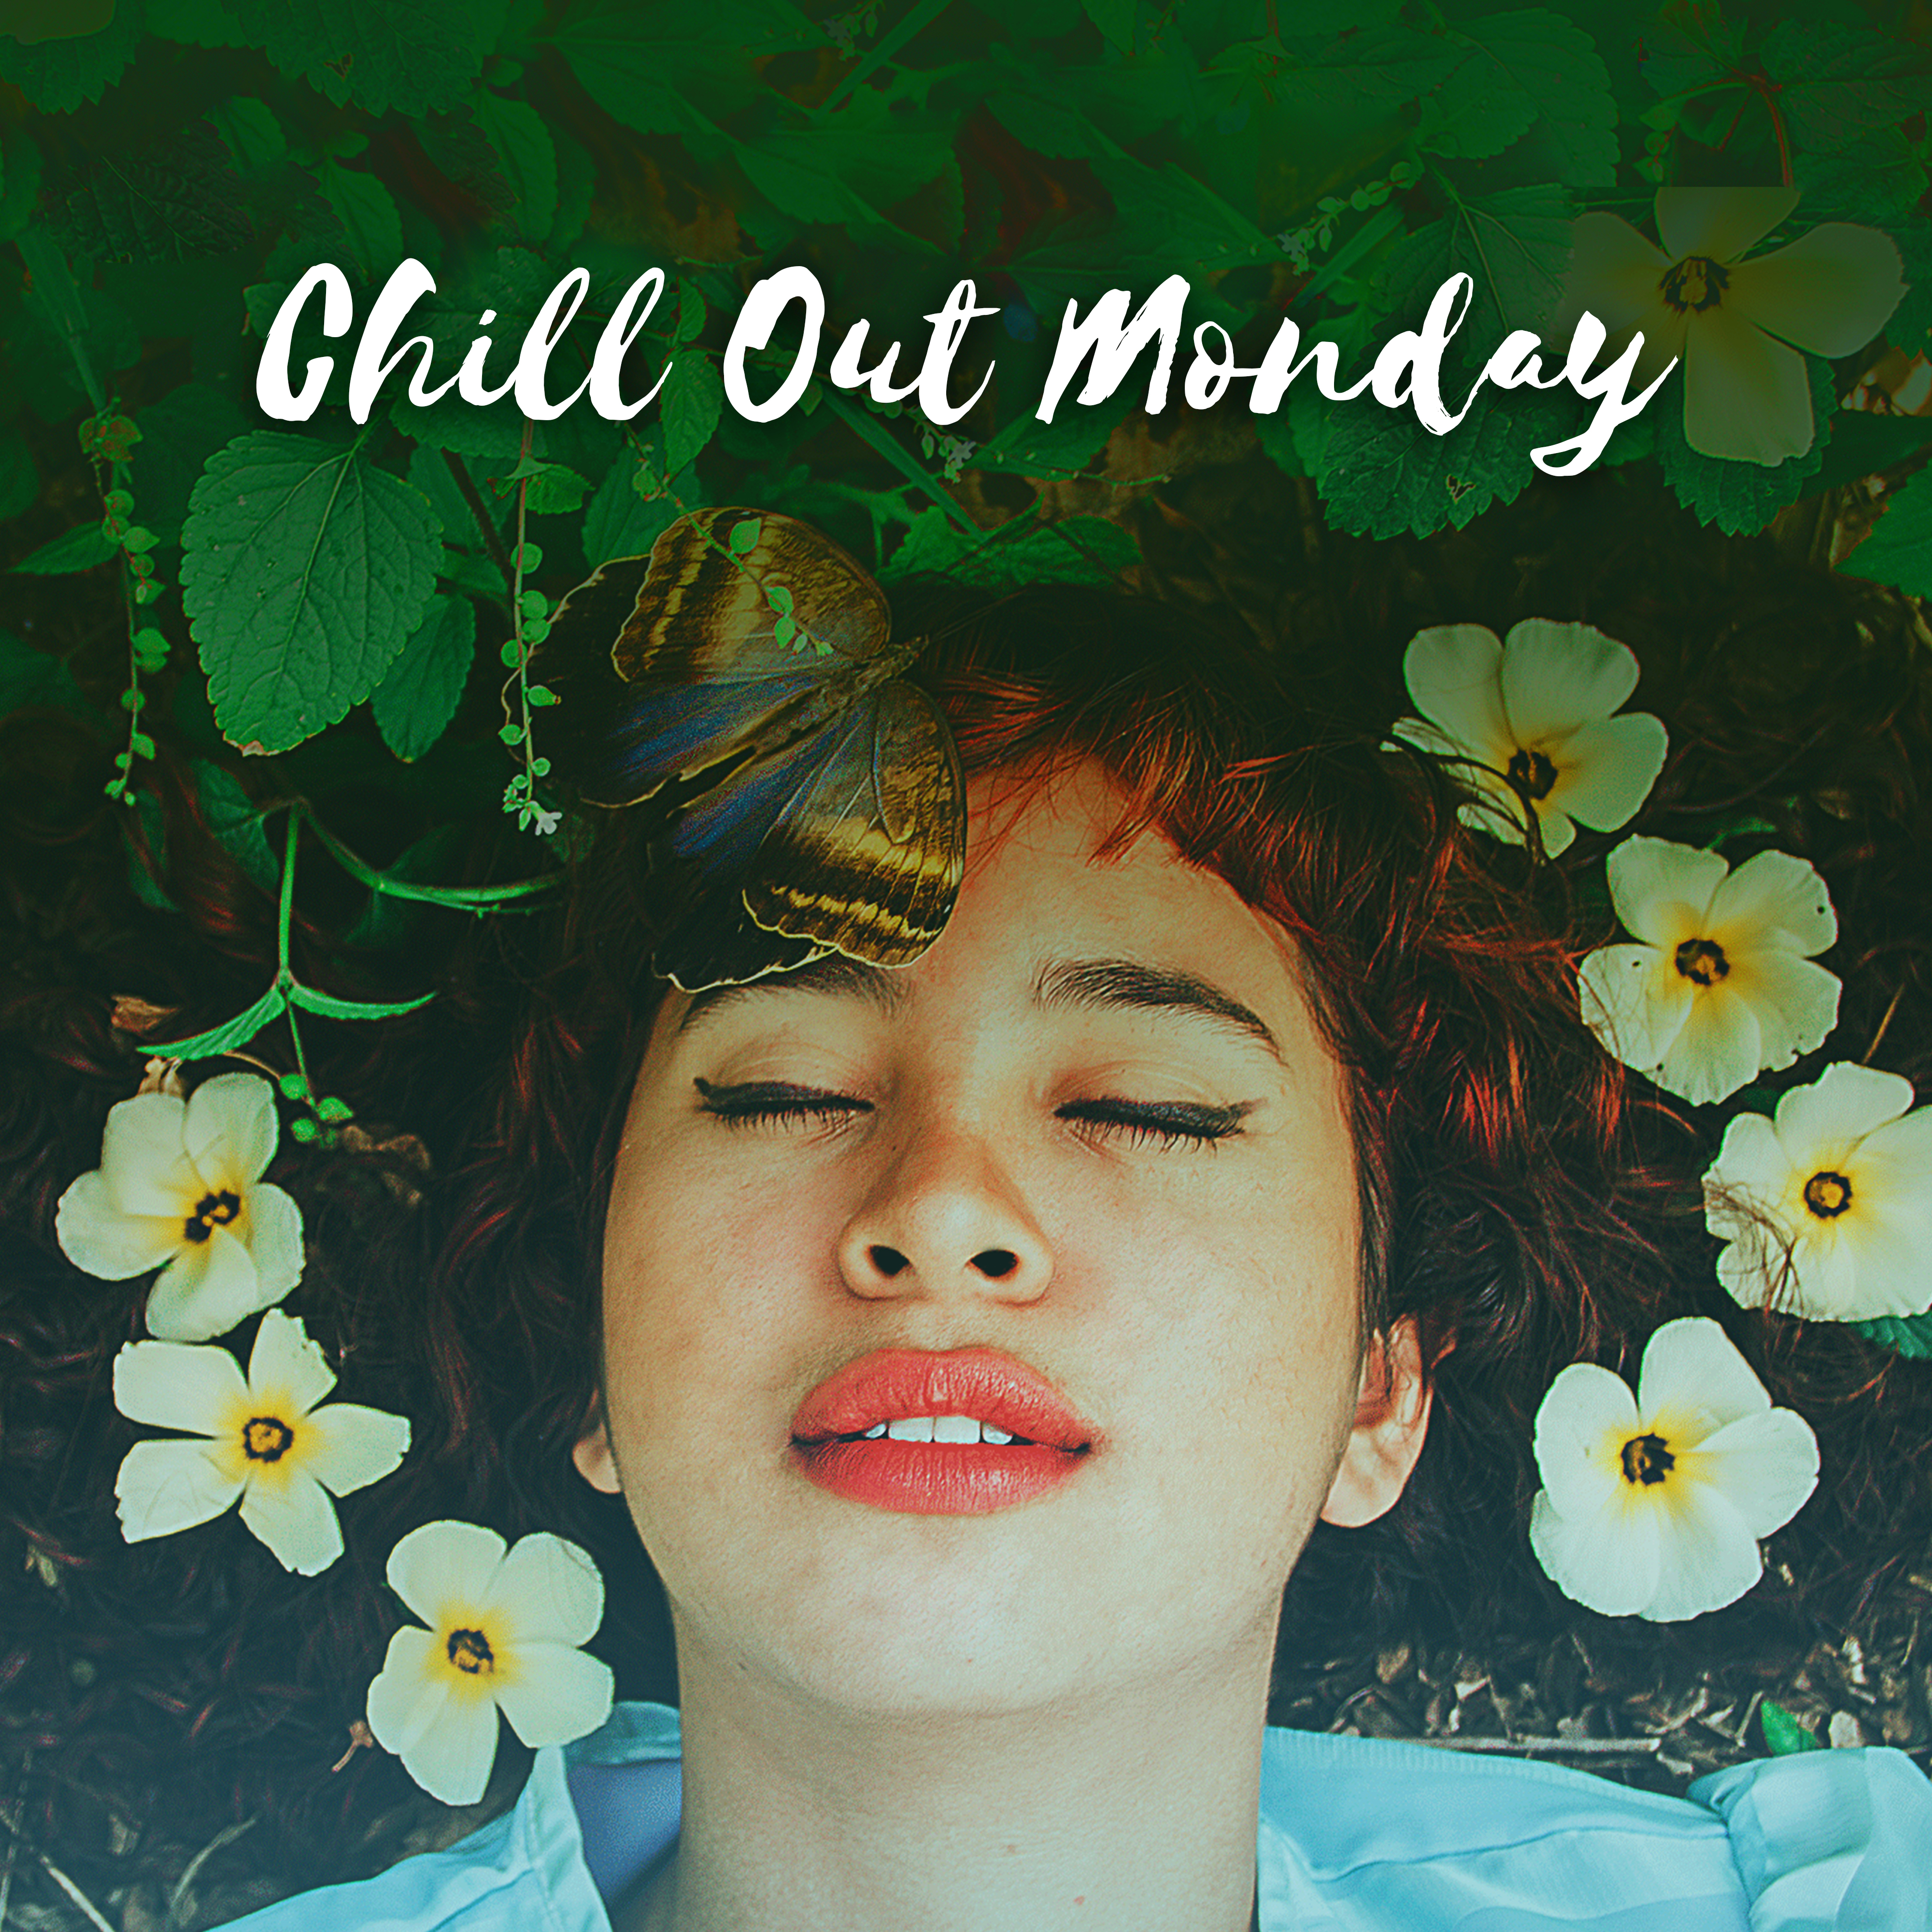 Chill Out on the Monday – Wake Up, Chill Out Music, Summer Lounge, Relax, Morning Chill